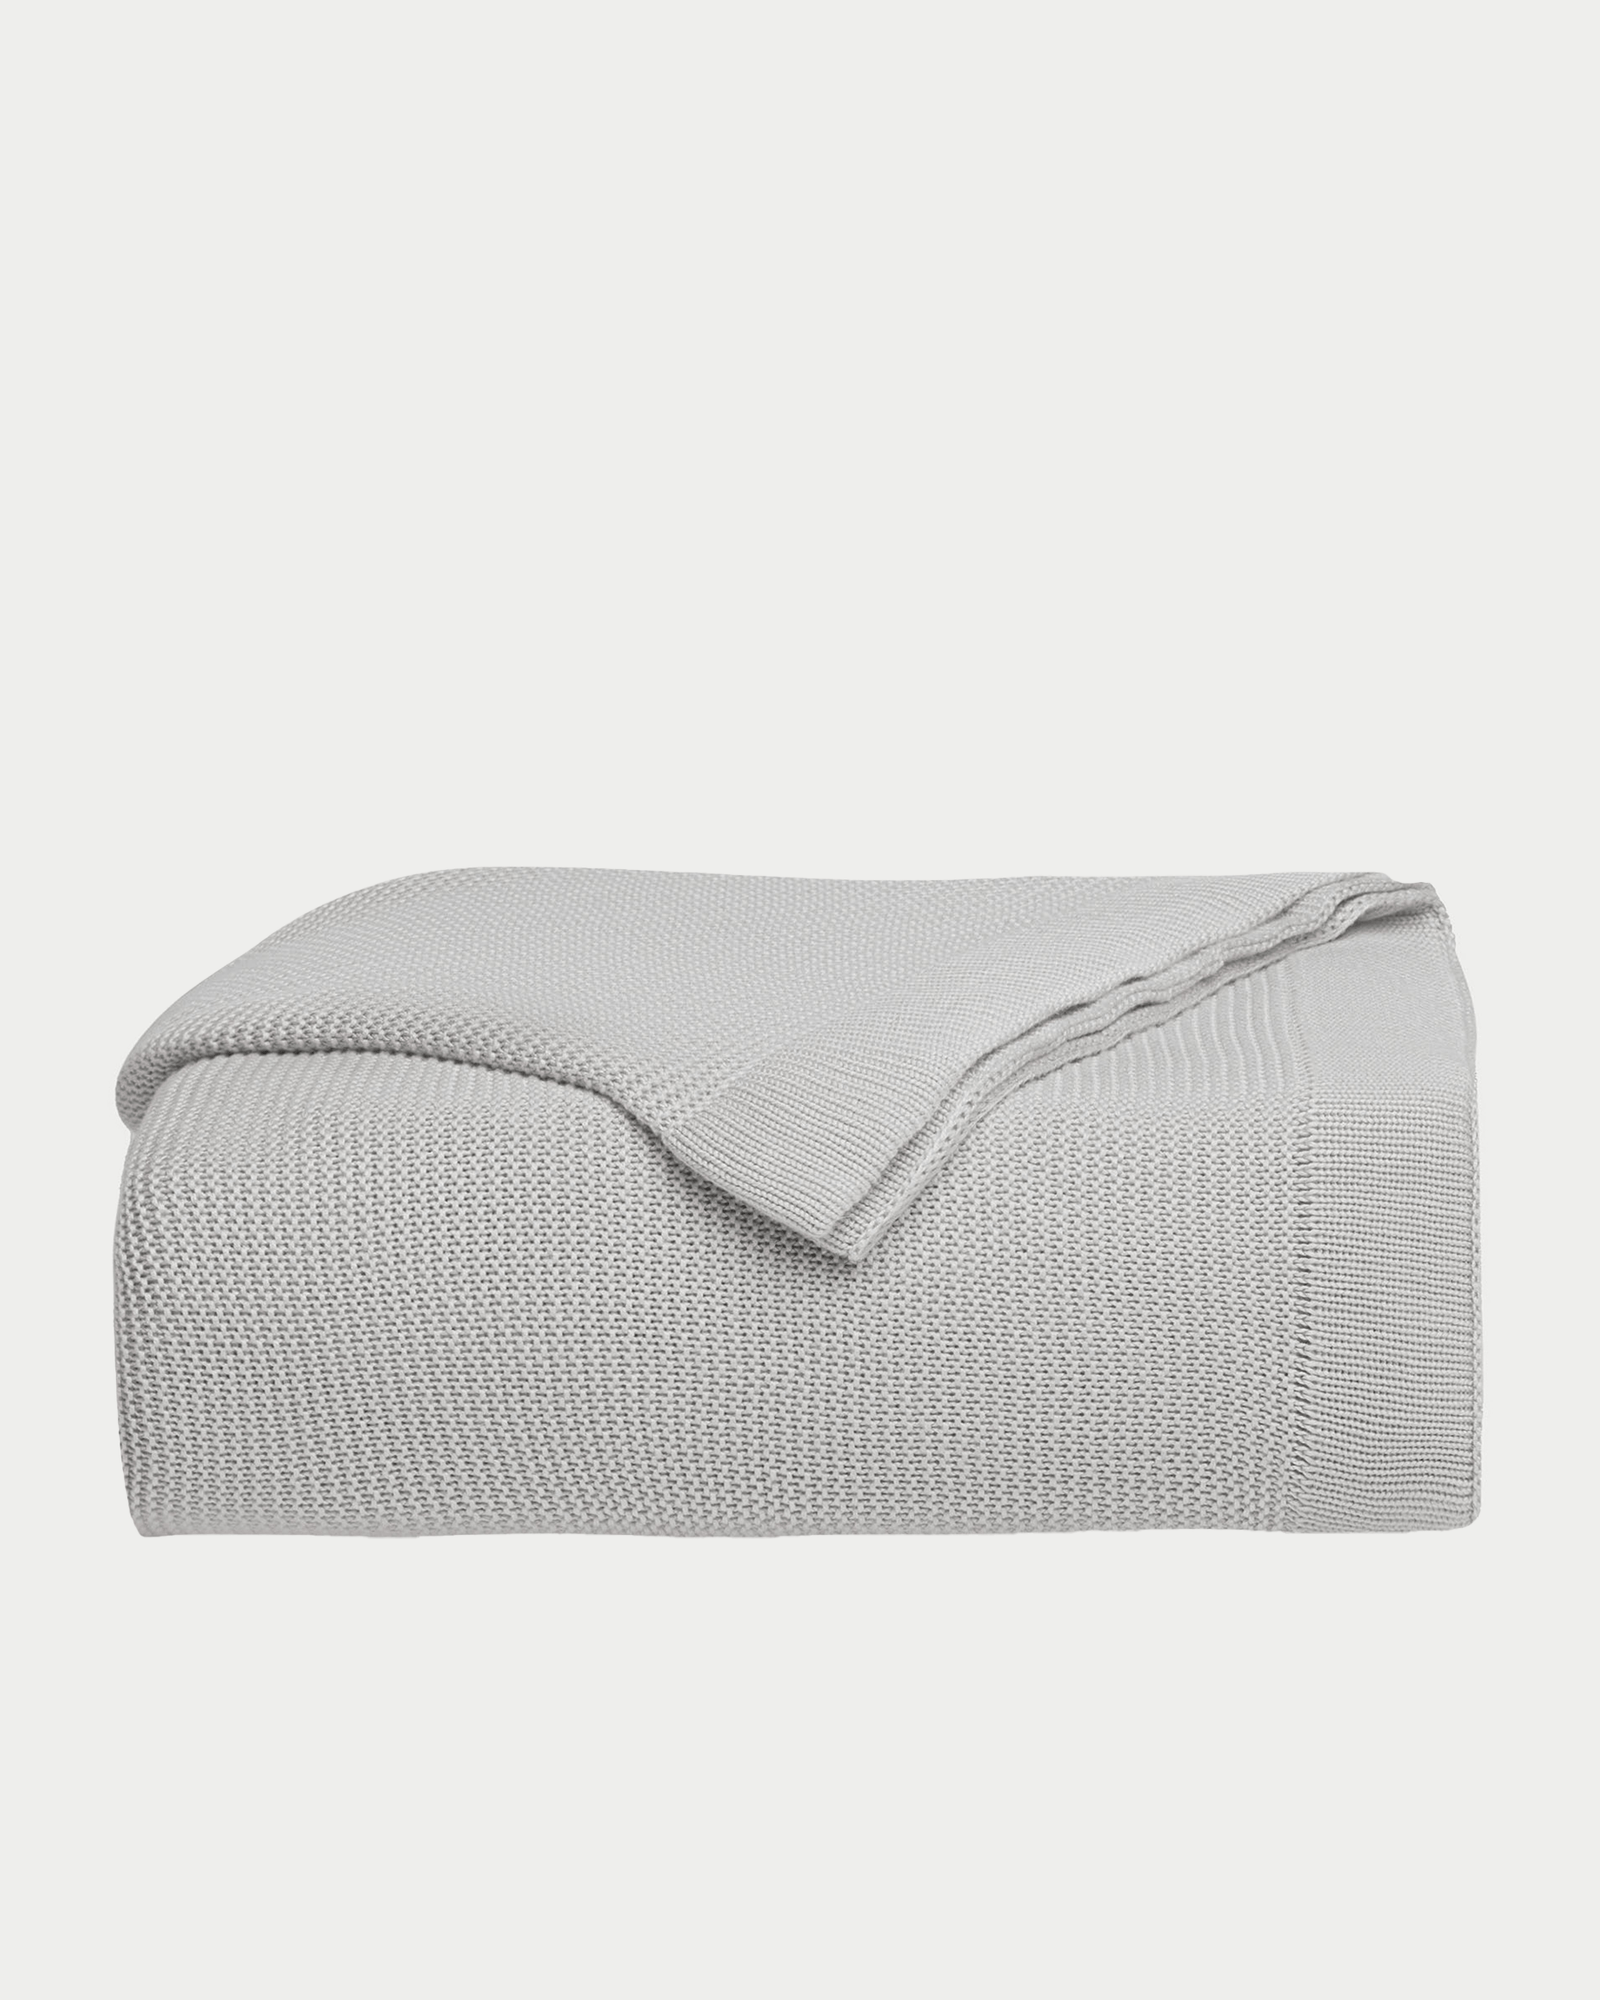 Light Grey cloud knit blanket folded with white background 